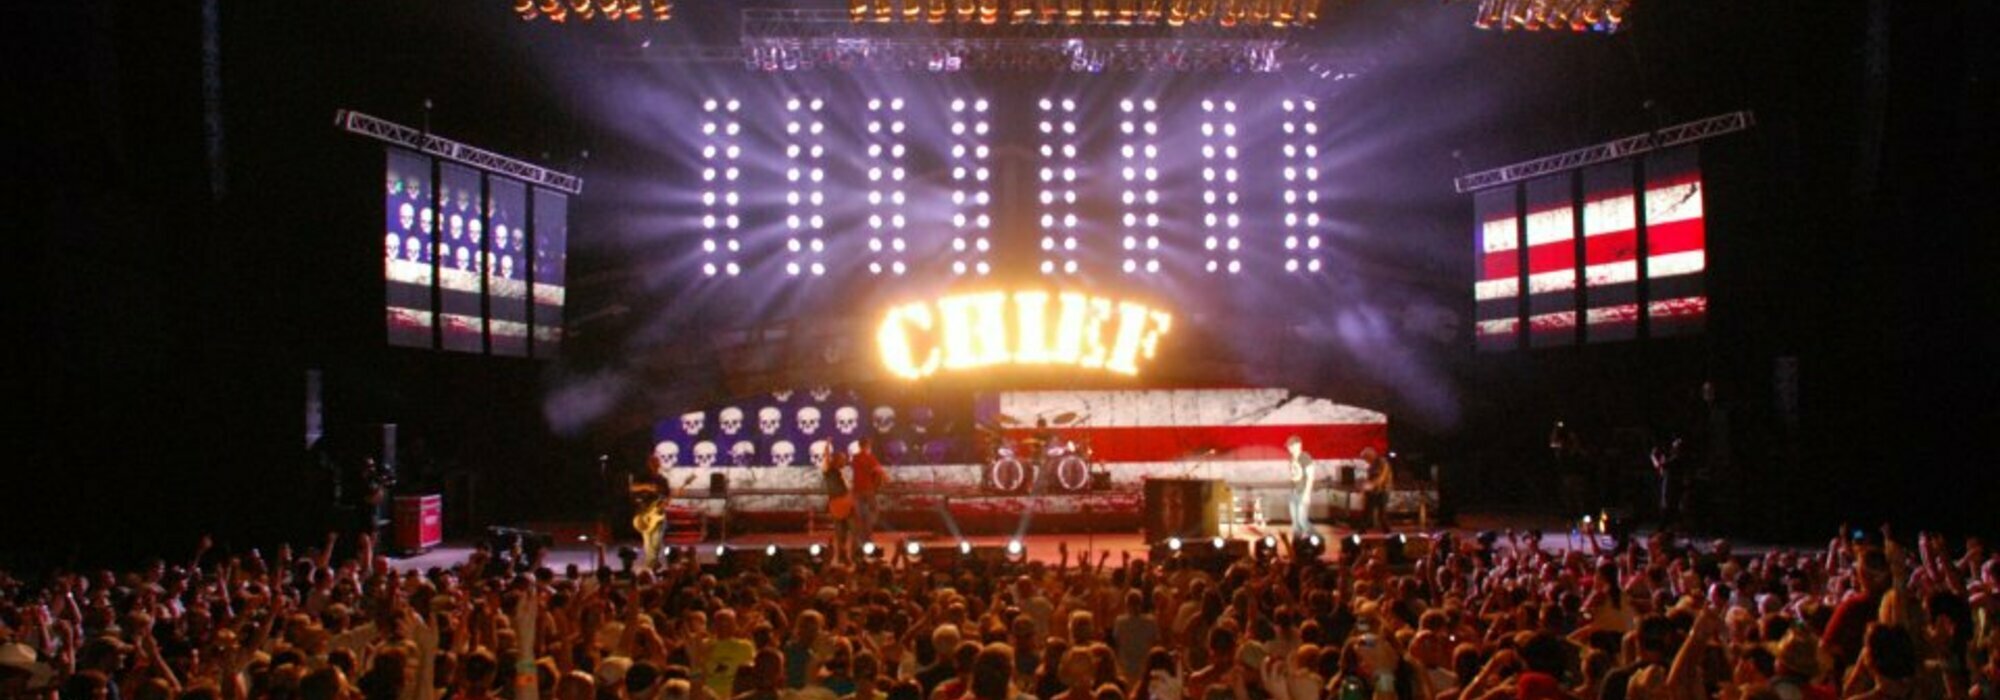 A Country Concert live event